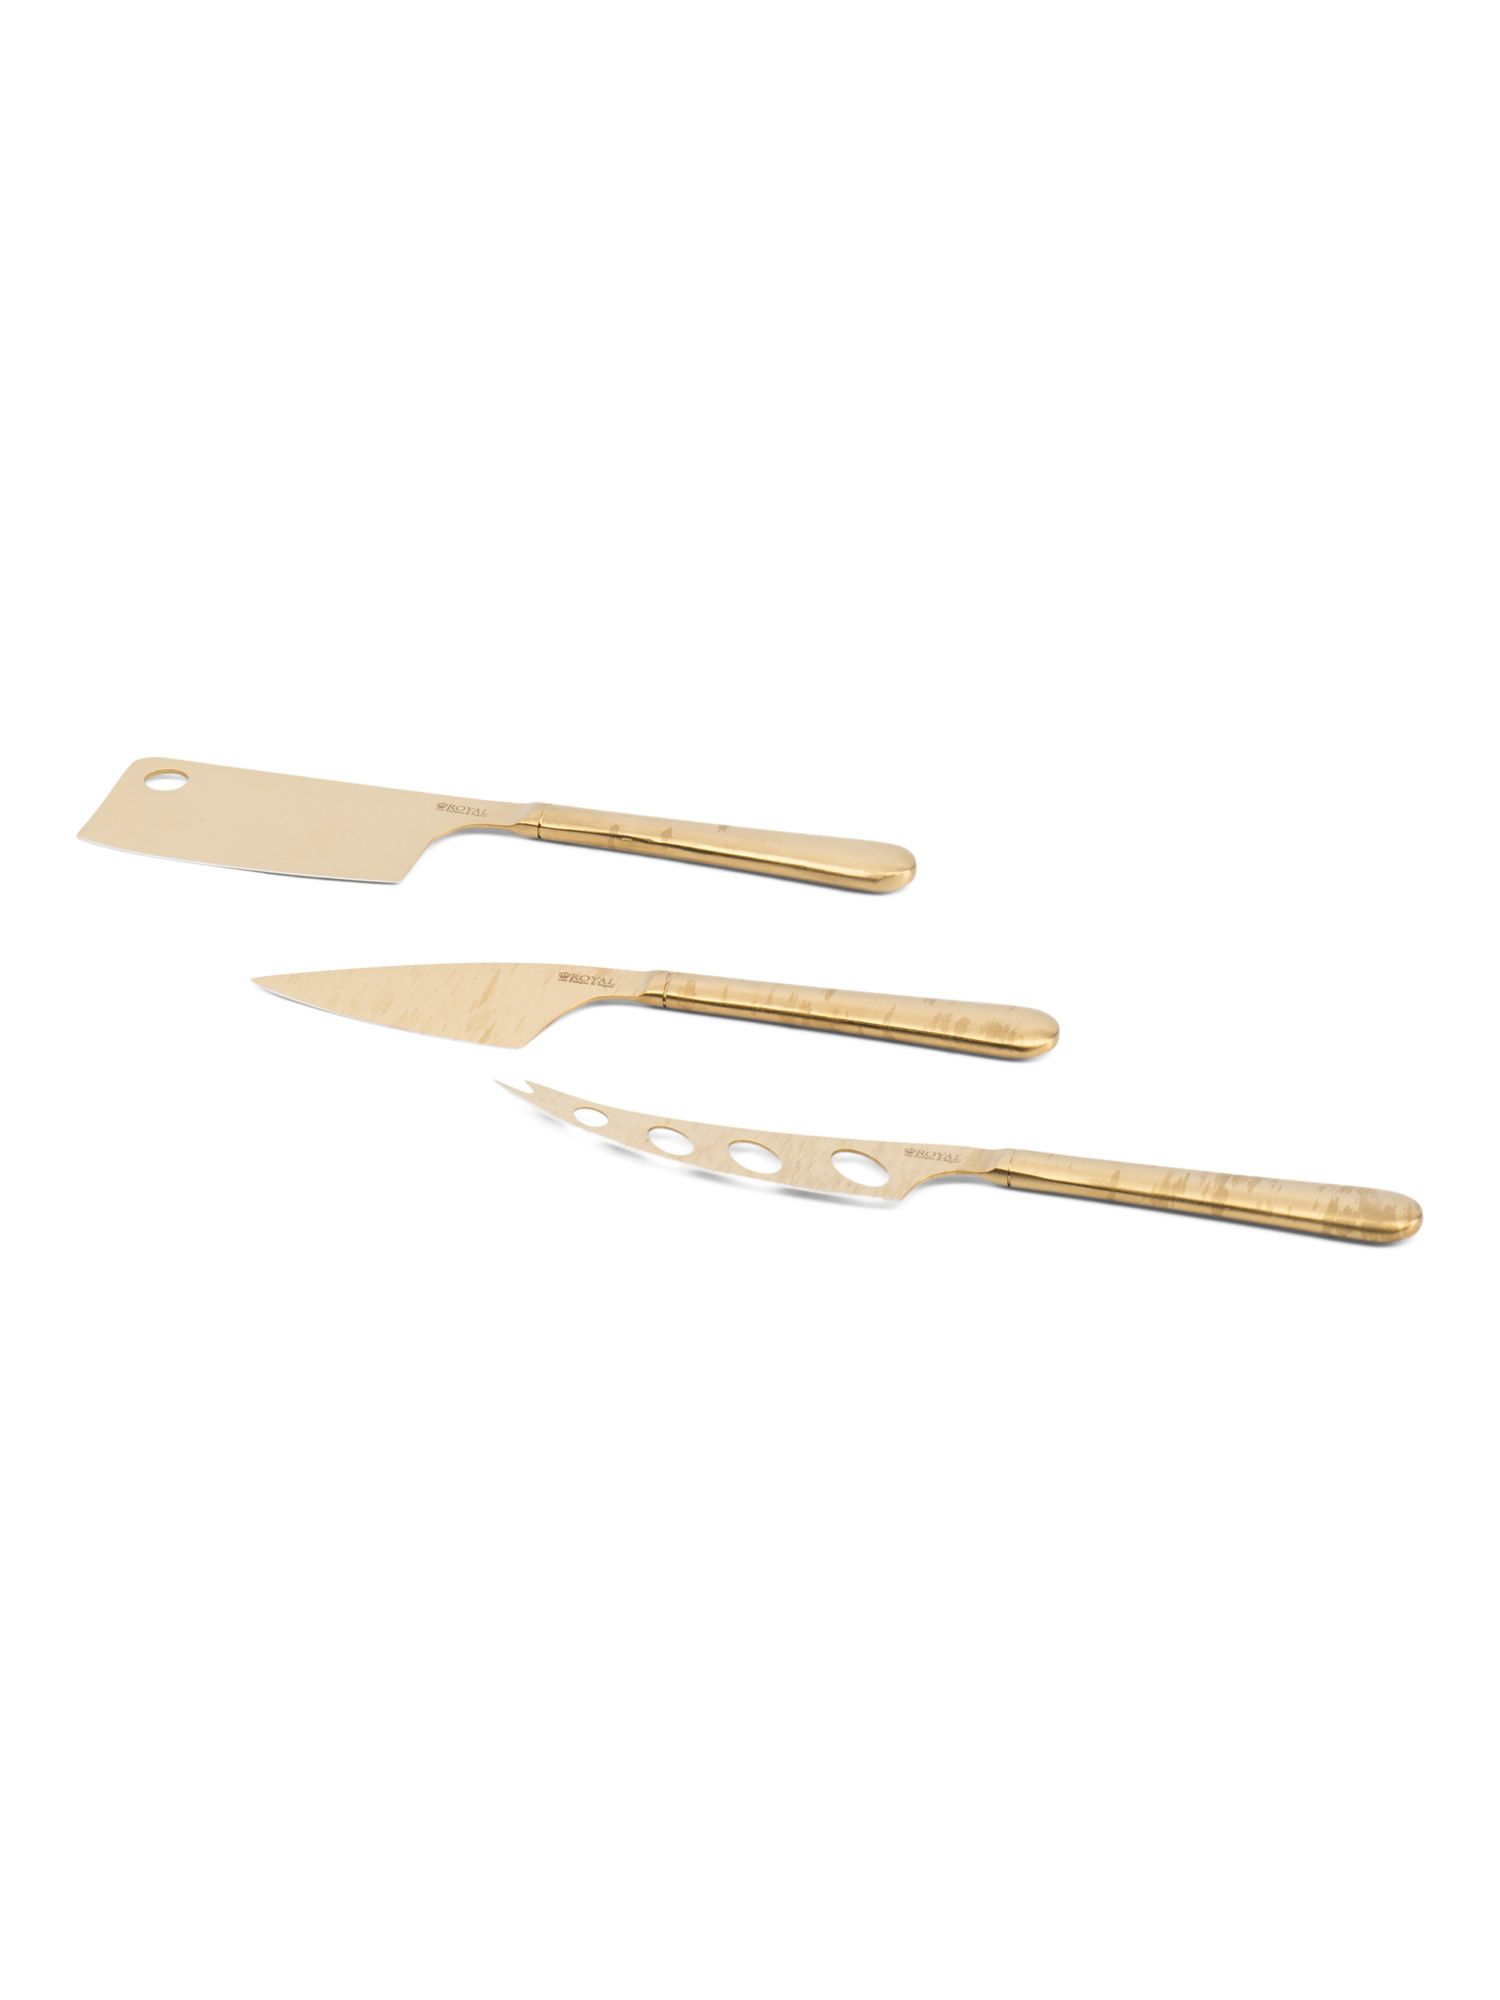 3pc Stainless Steel Cheese Knife Set | TJ Maxx